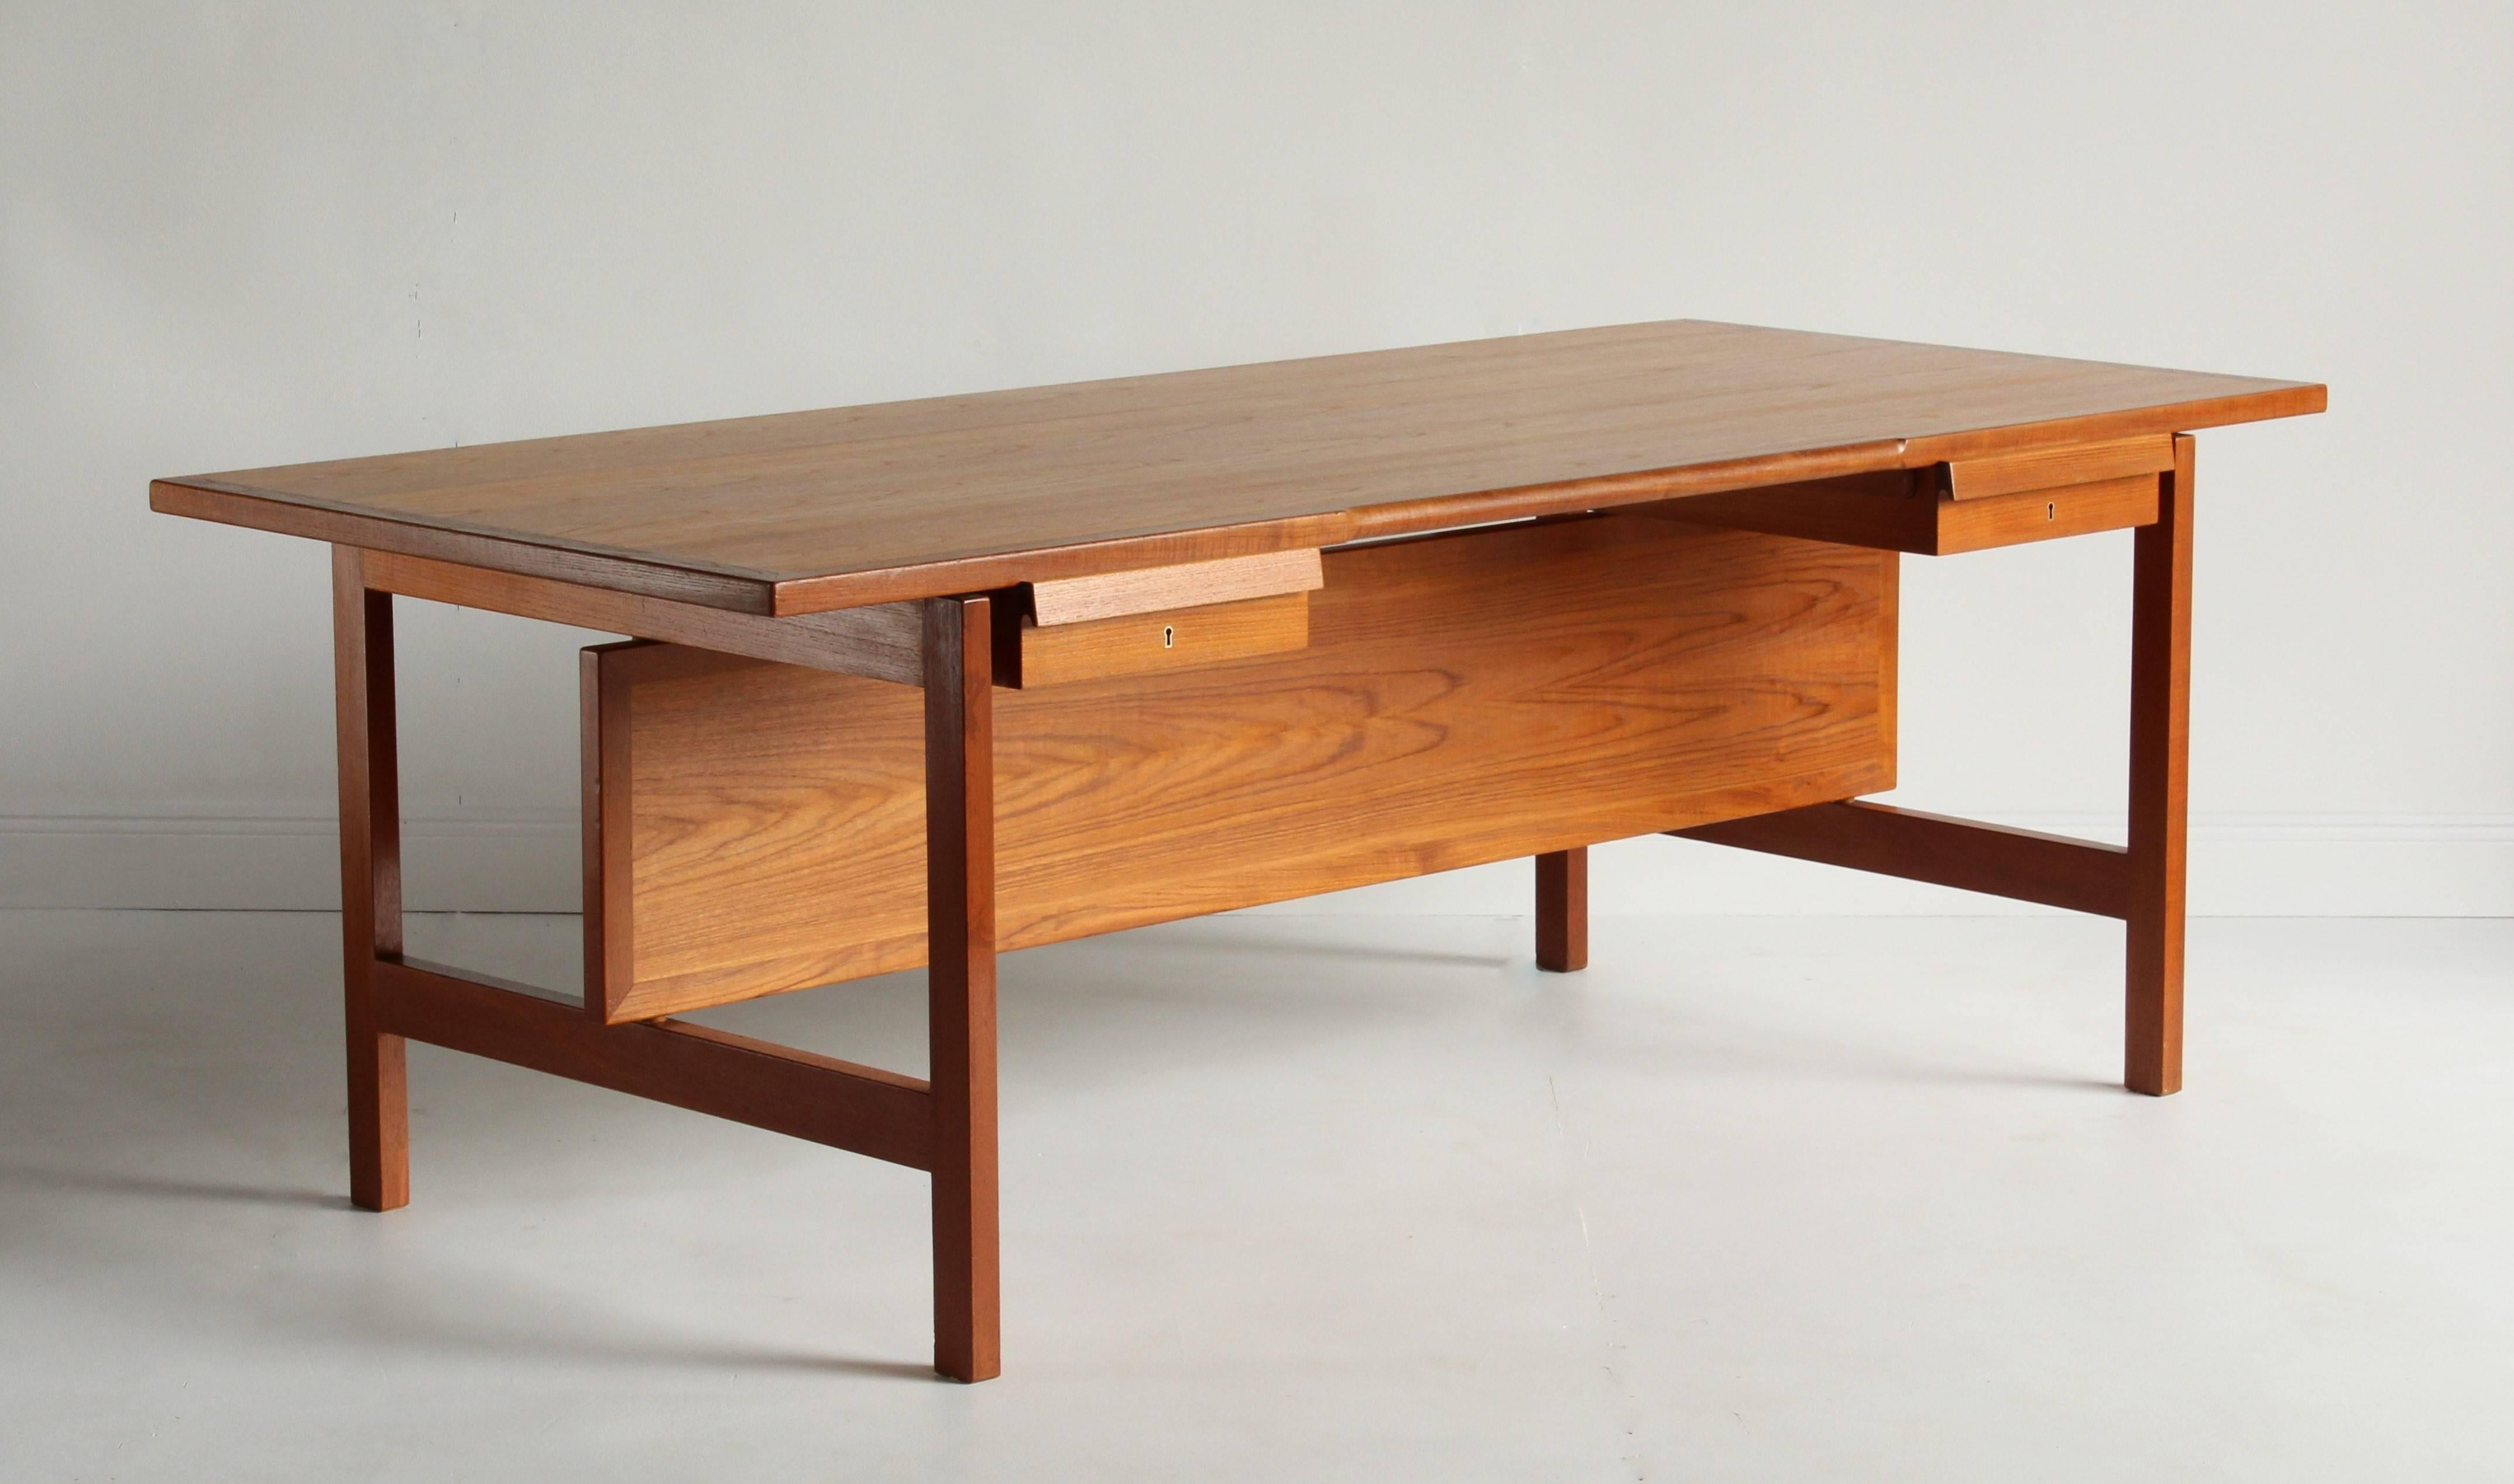 A large teak desk by Danish designer Hans Wegner, produced by Andreas Tuck. The present example is a rare variation of the 